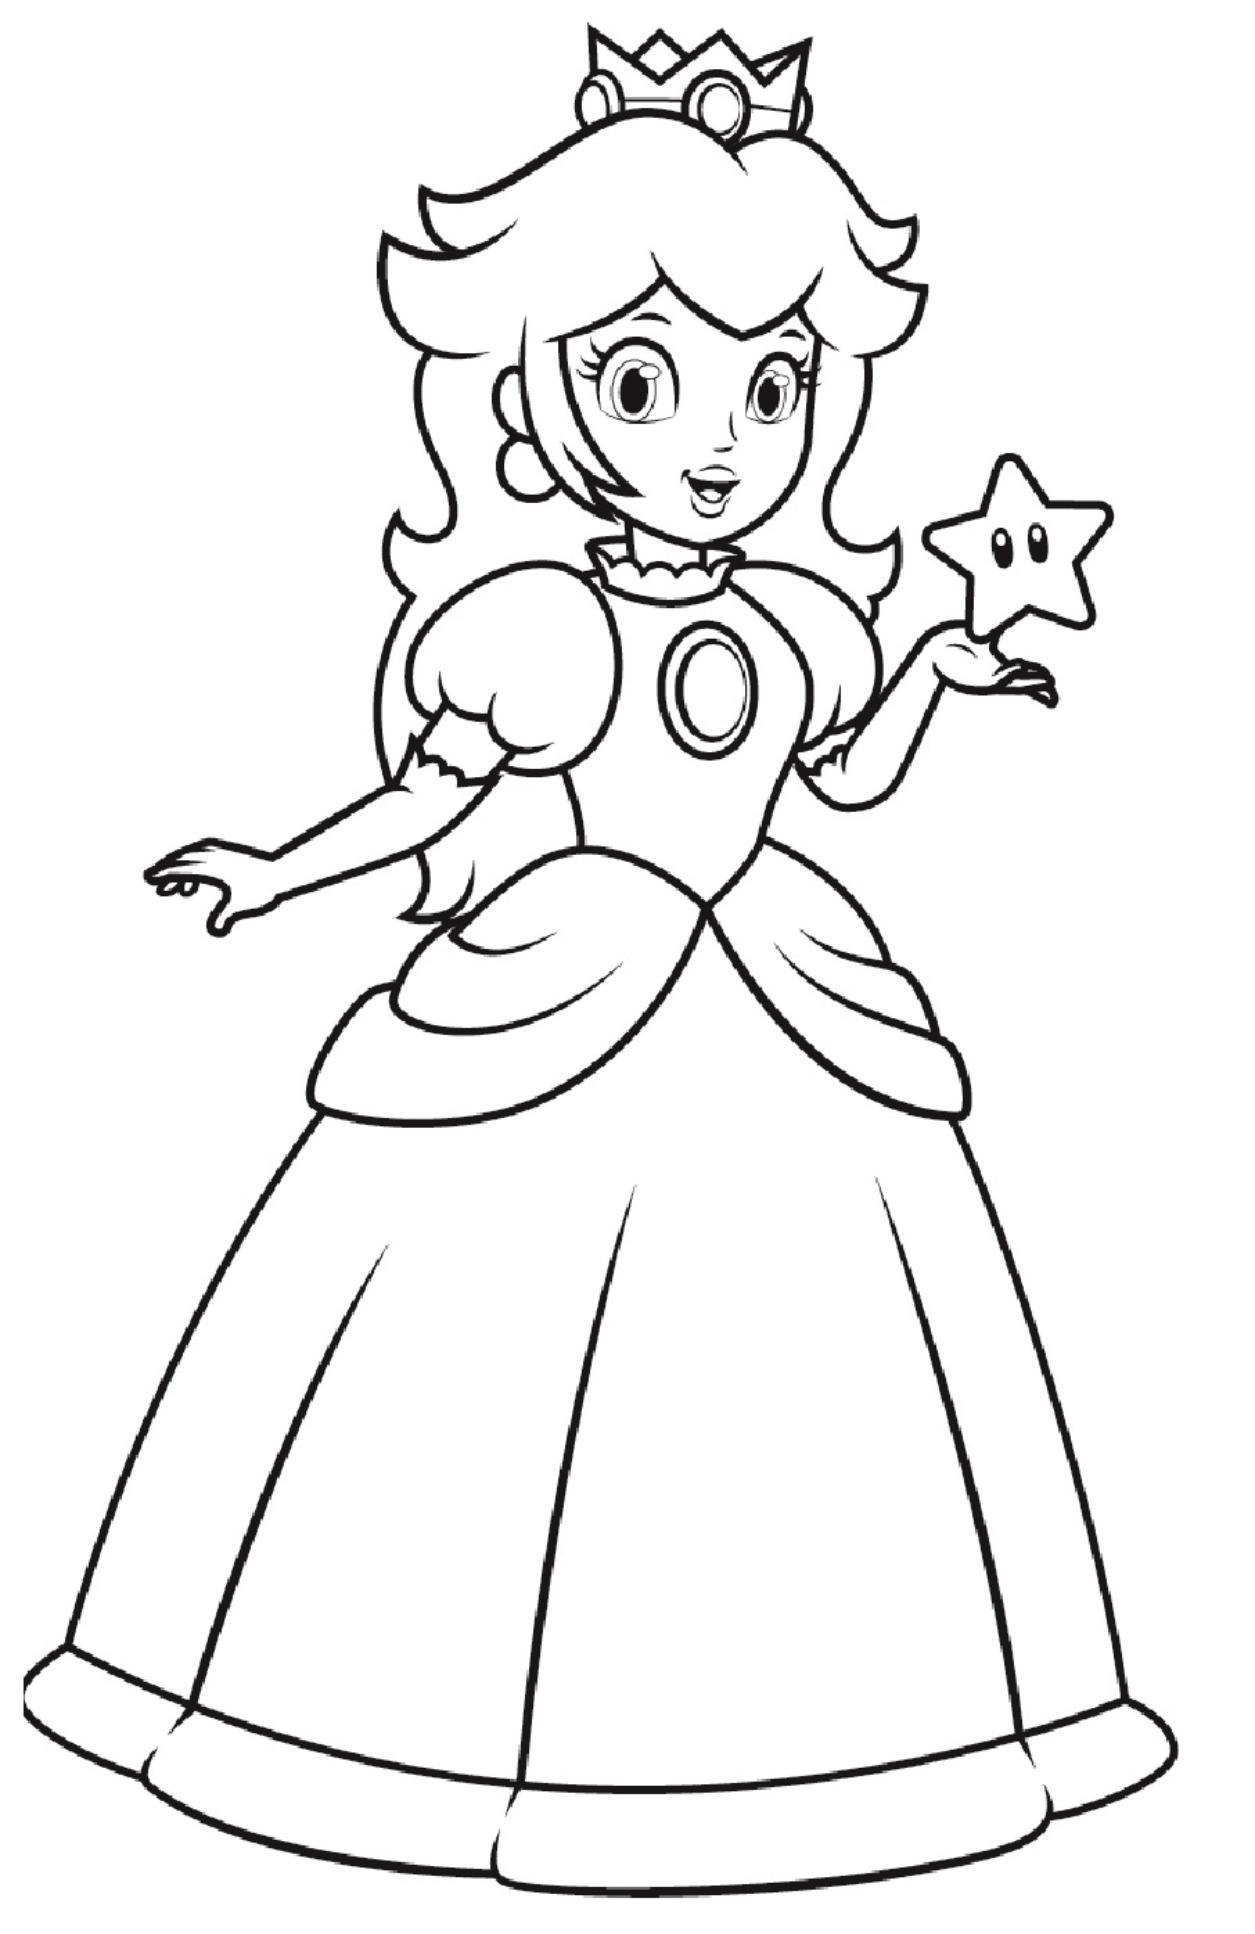 Princess Peach From Super Mario Bros Coloring Page Easy Drawing Guides